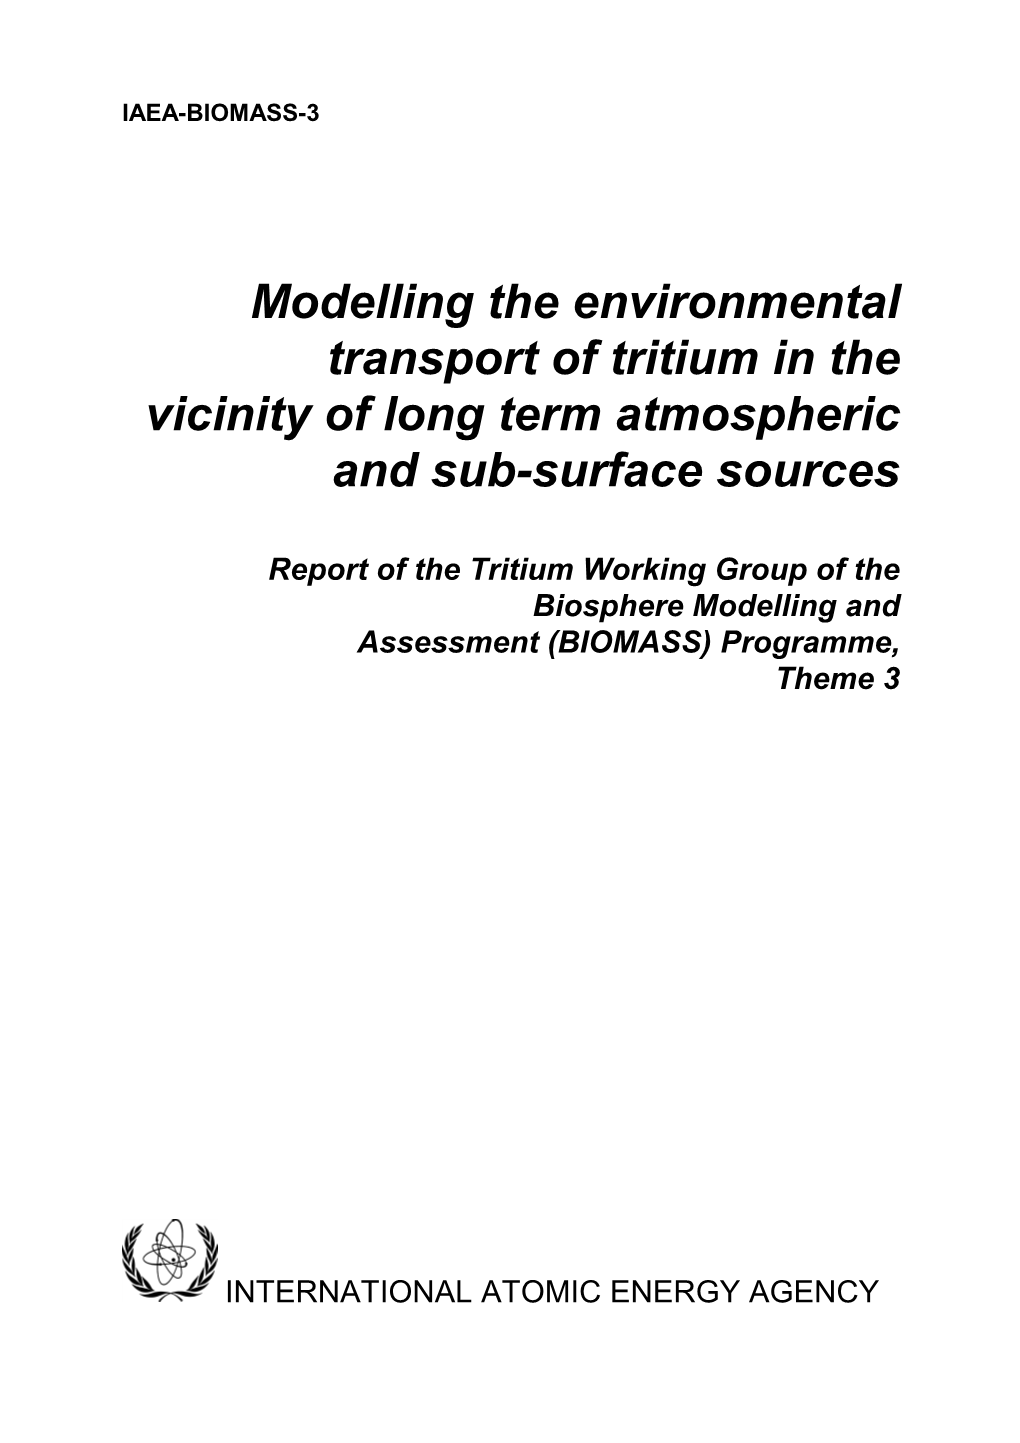 Modelling the Environmental Transport of Tritium in the Vicinity of Long Term Atmospheric and Sub-Surface Sources